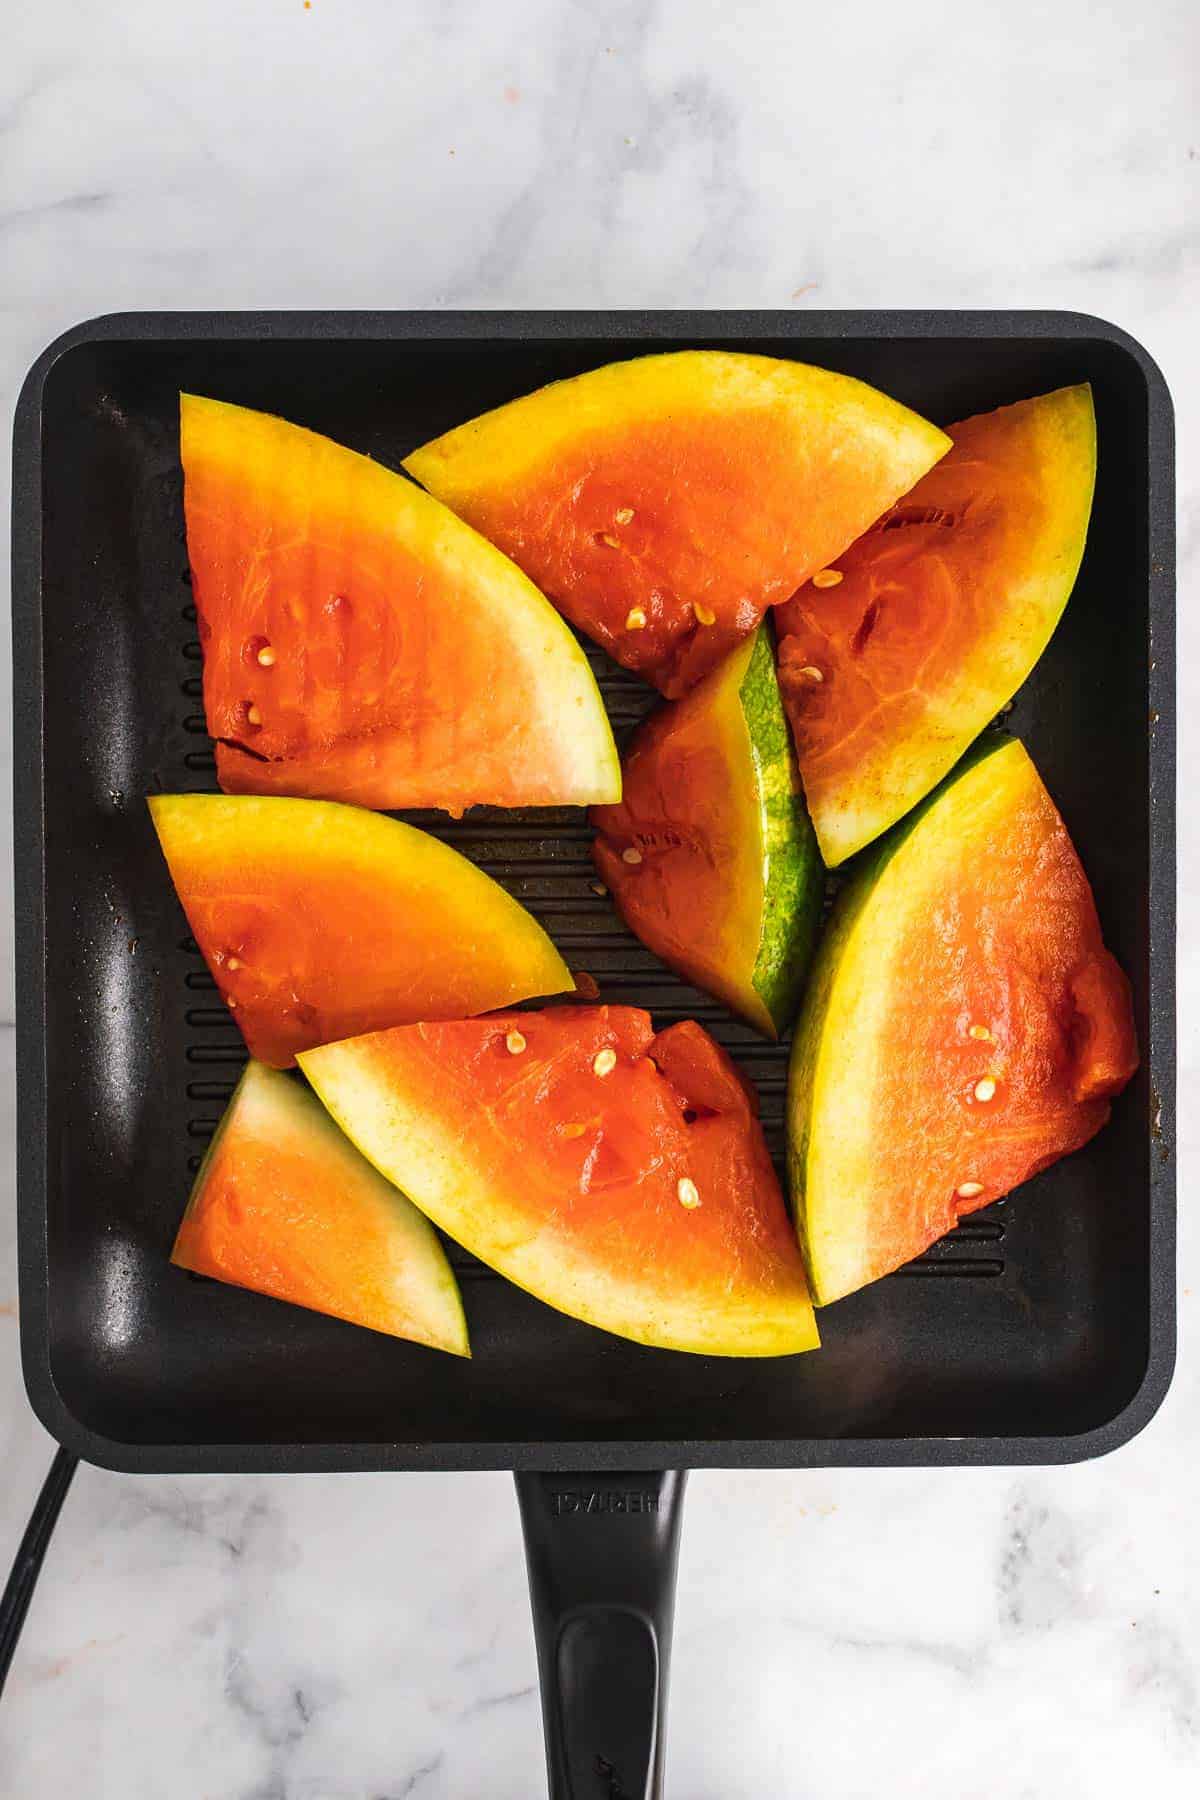 Watermelon slices on a grill pan